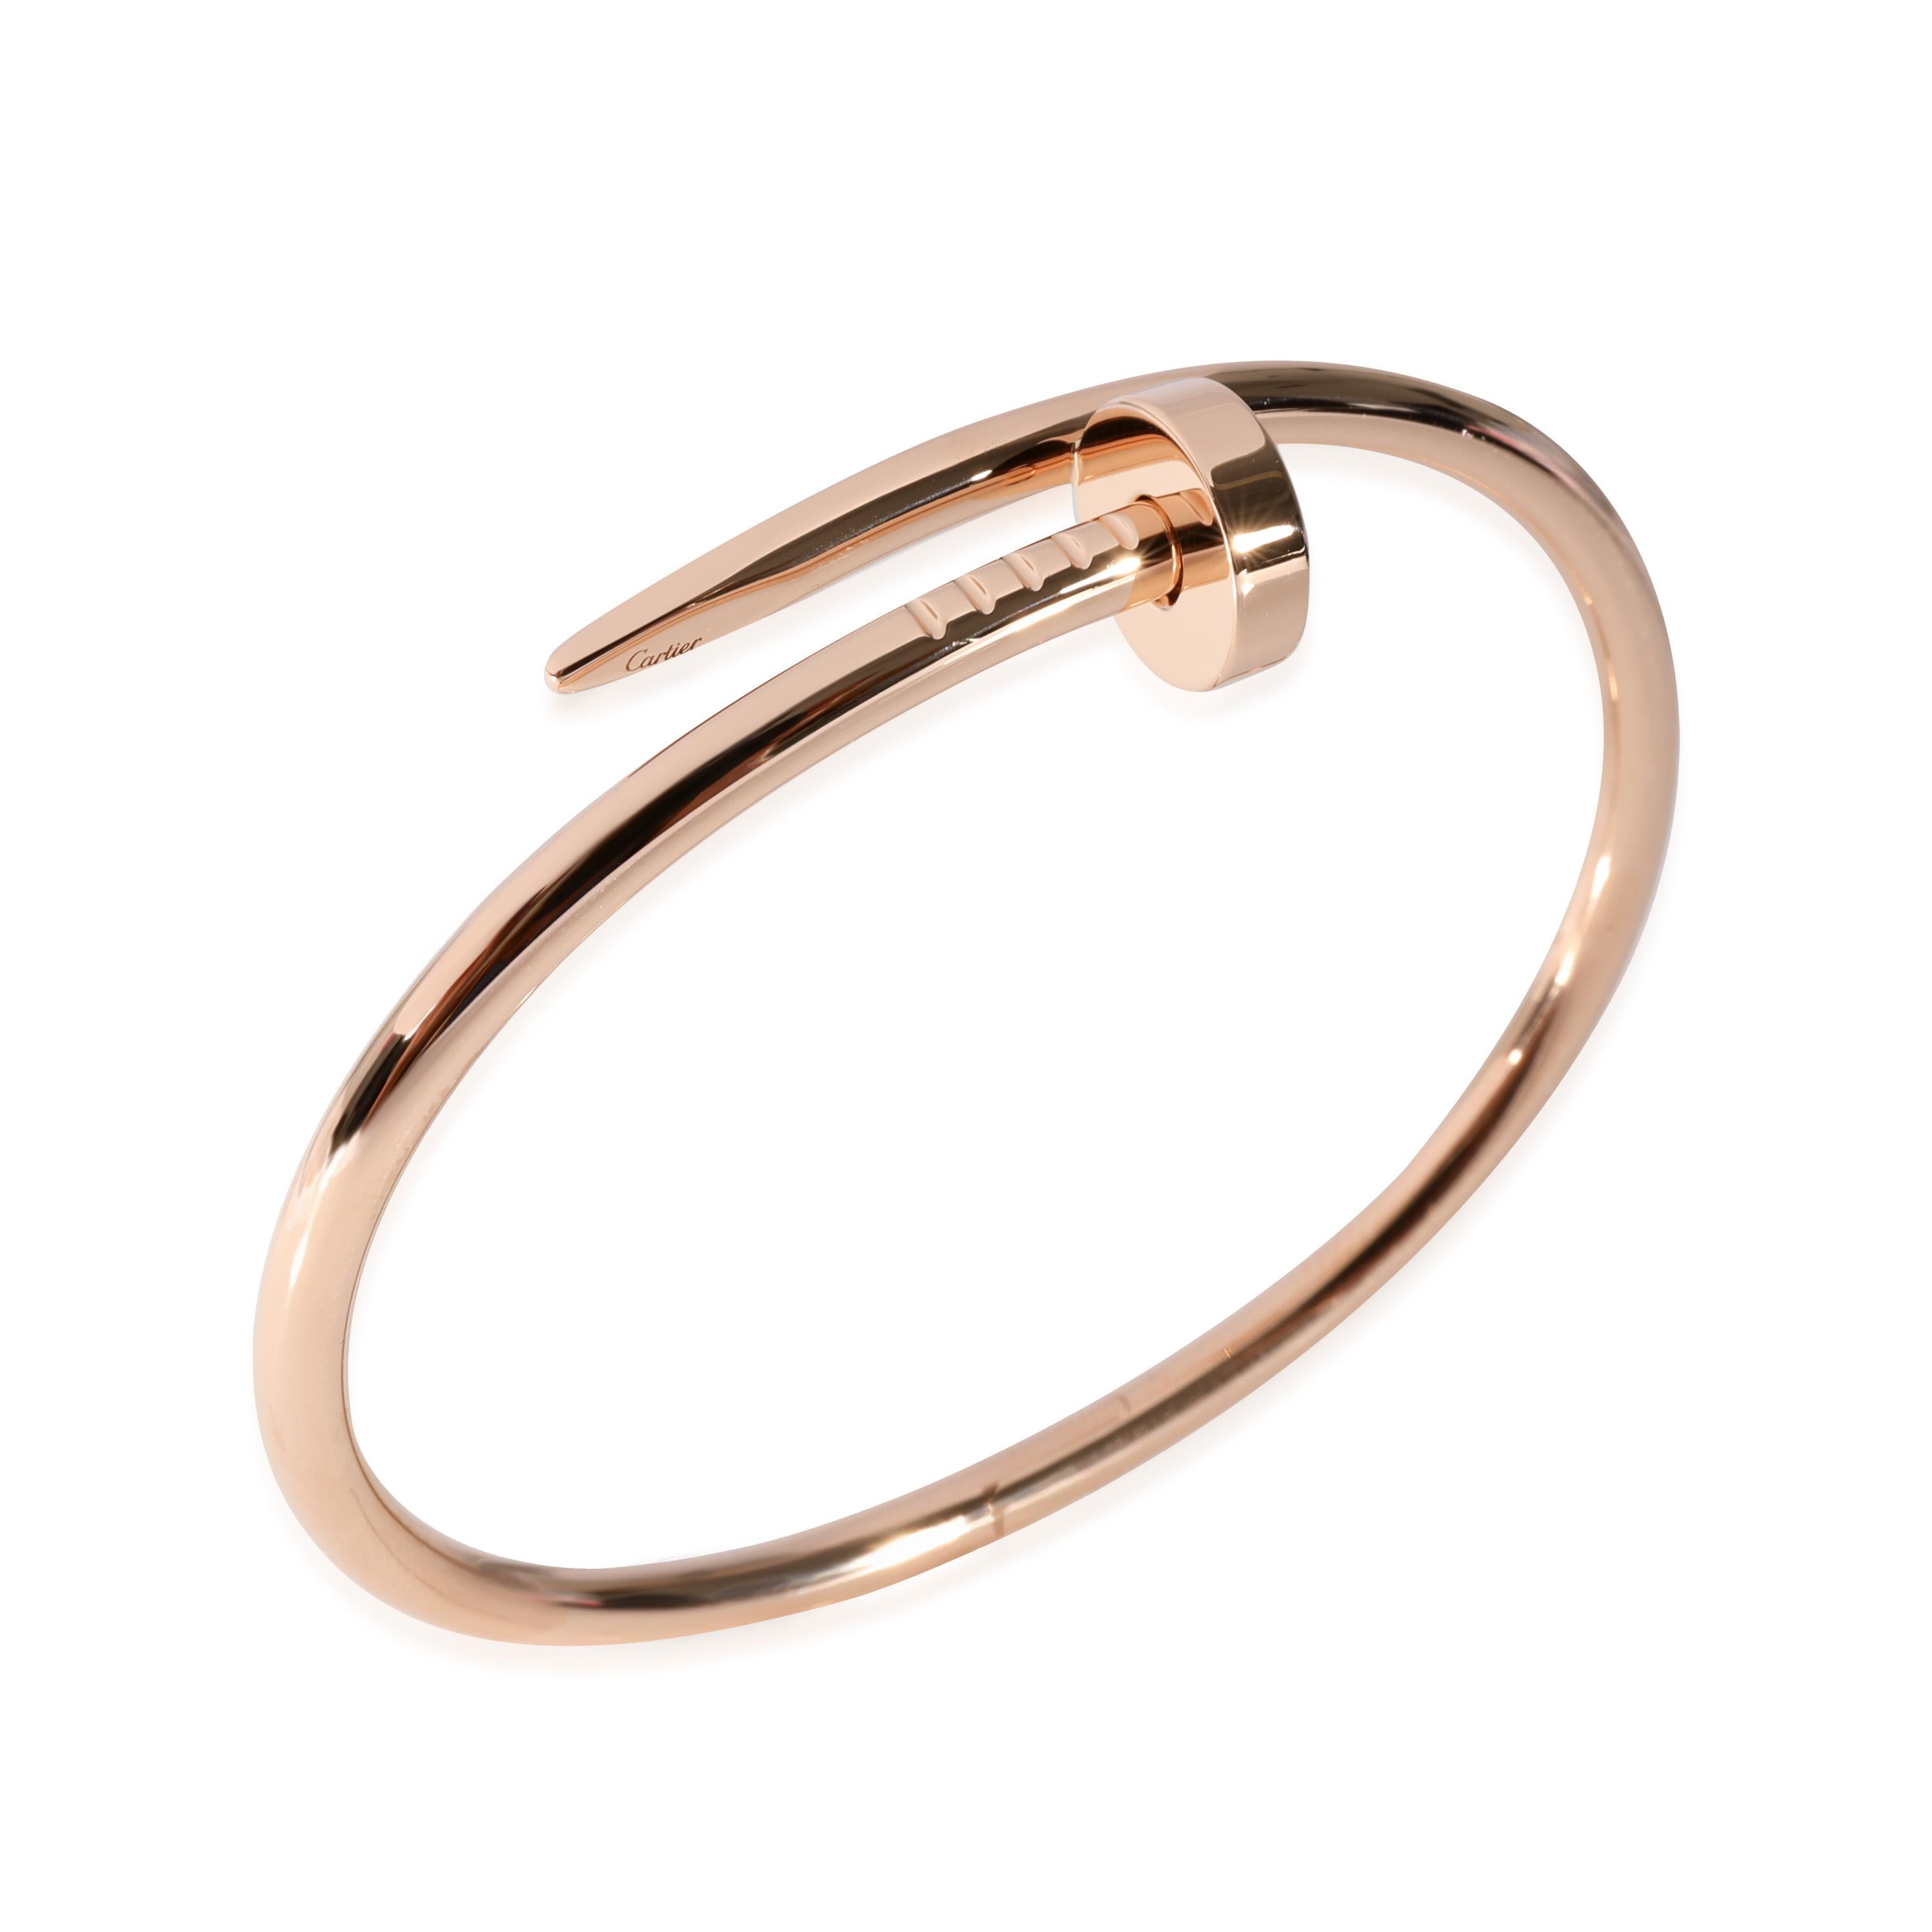 Cartier Juste Un Clou Bracelet in 18k Rose Gold

PRIMARY DETAILS
SKU: 125476
Listing Title: Cartier Juste Un Clou Bracelet in 18k Rose Gold
Condition Description: Retails for 7500 USD. In excellent condition and recently polished. 17 inches in